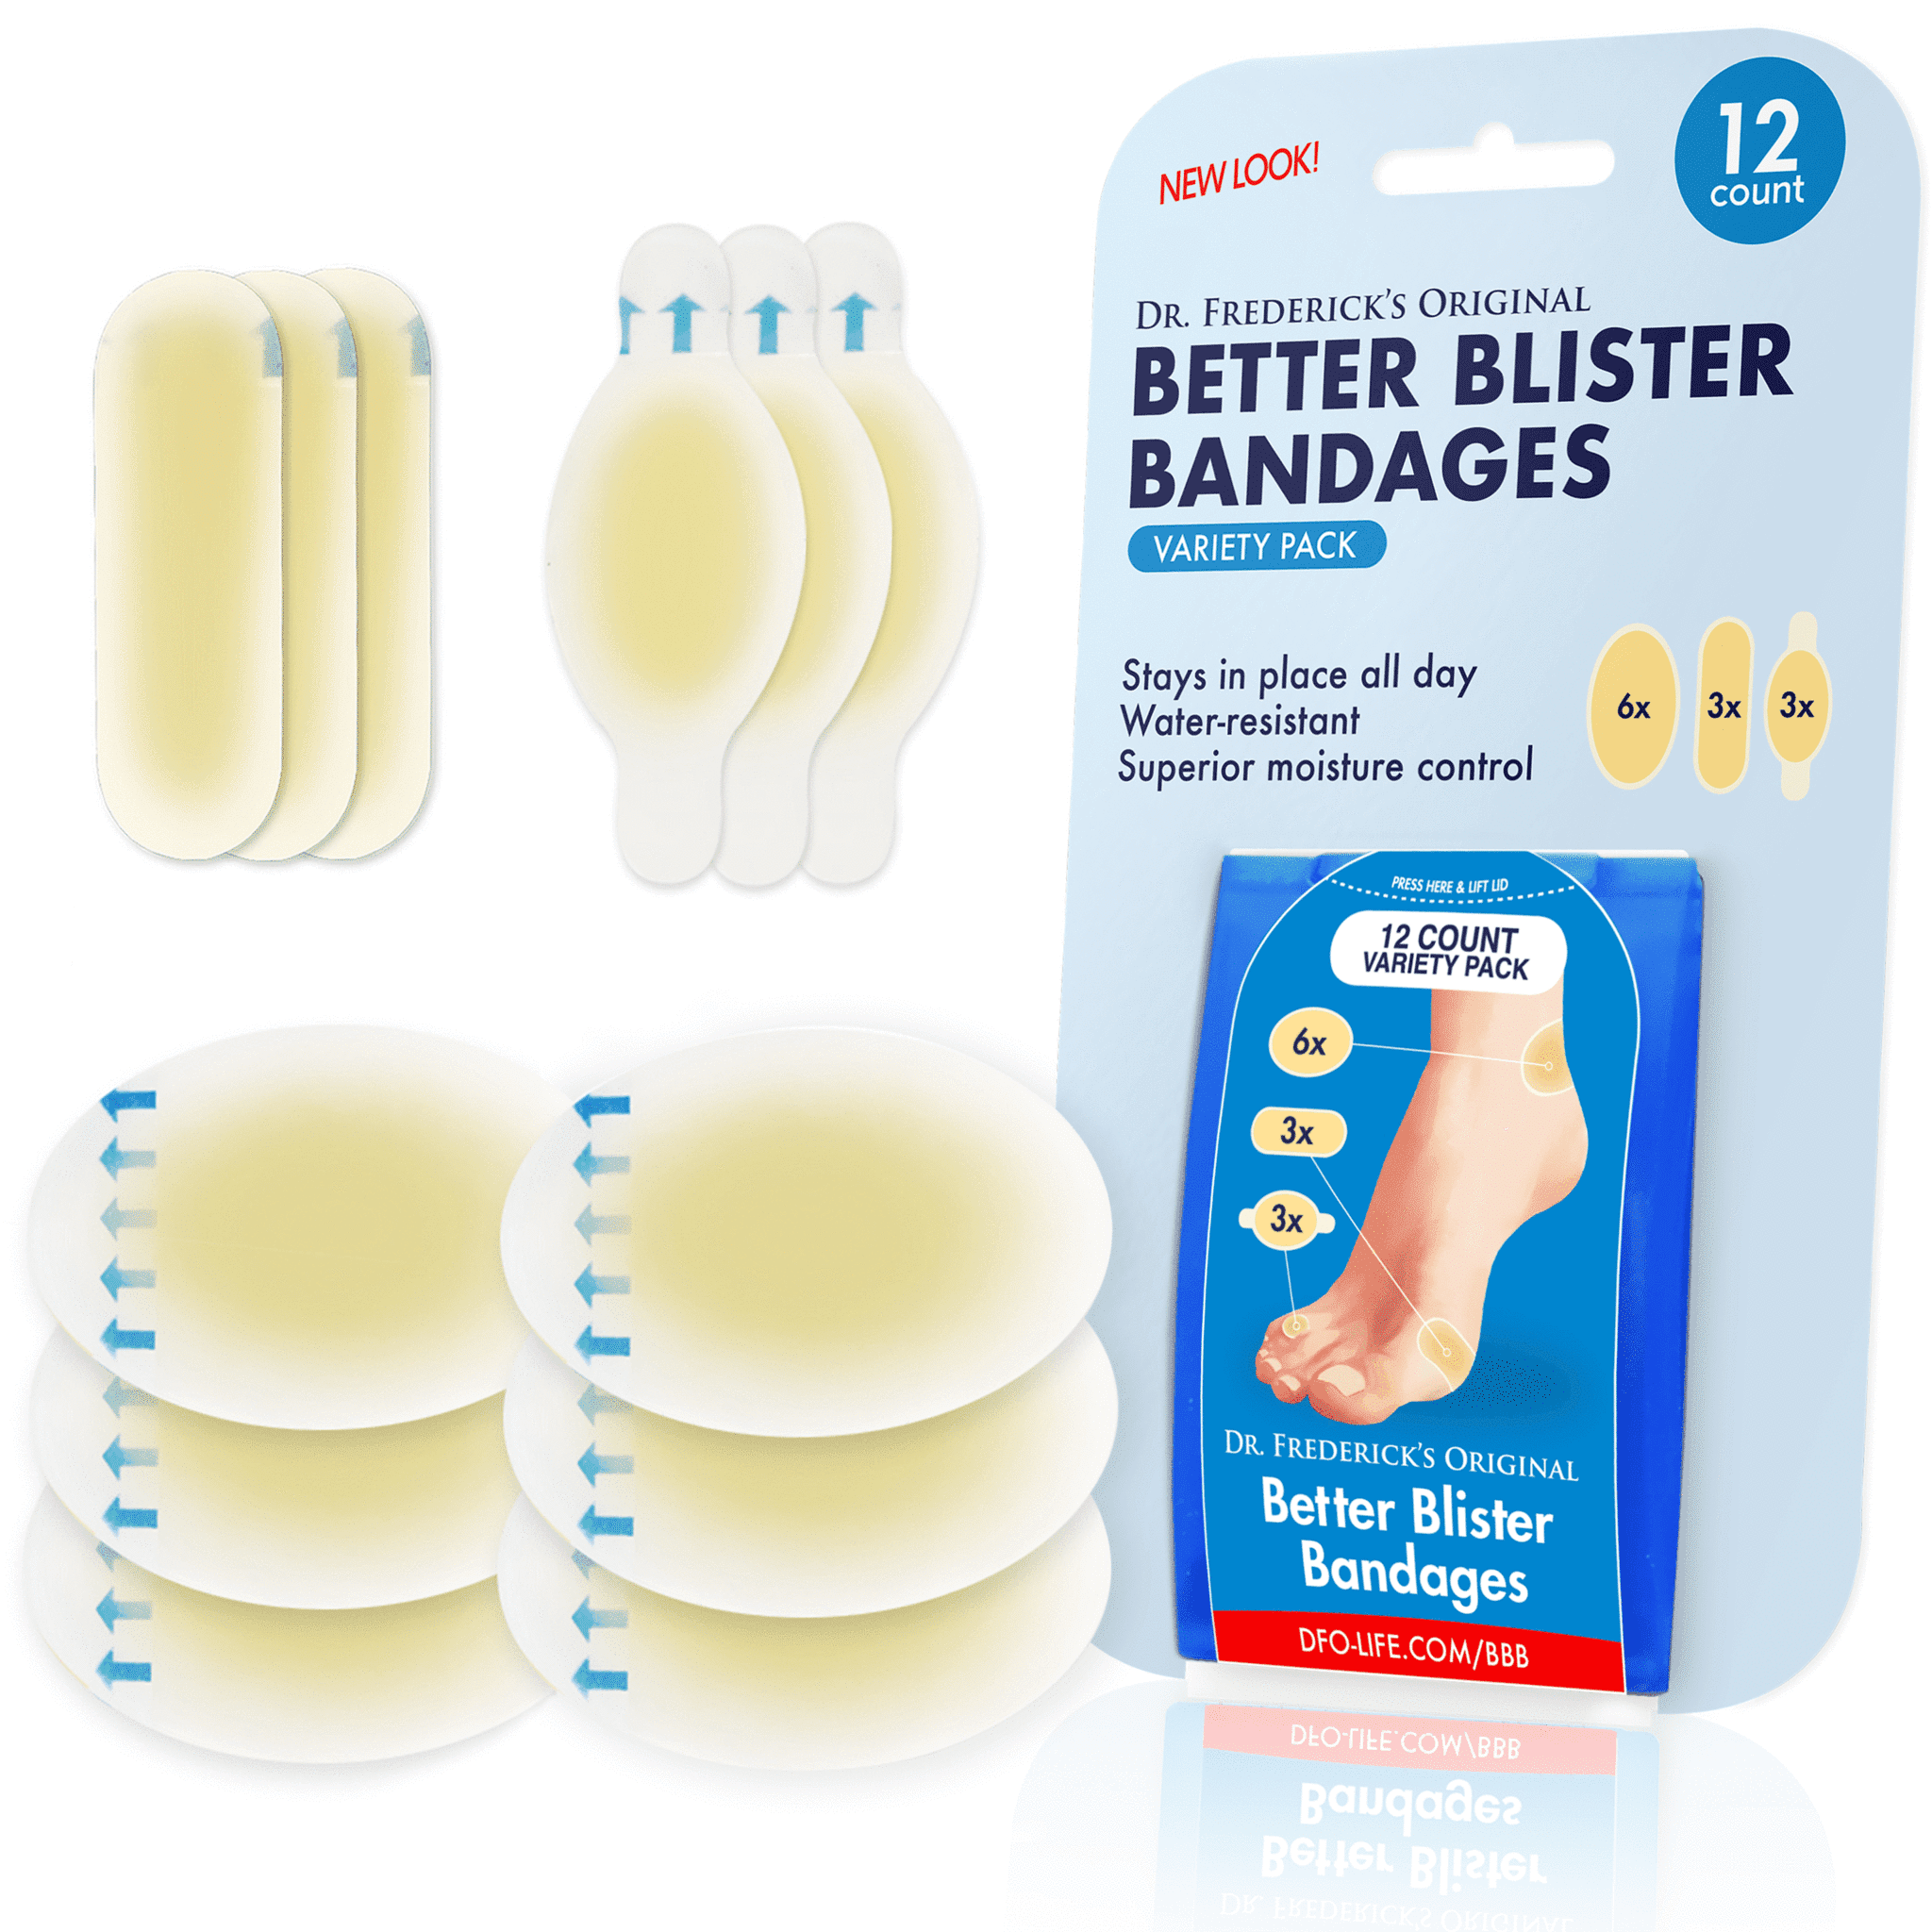 KT Performance+ Adhesive Blister Treatment Patch 6 Count - Walmart.com